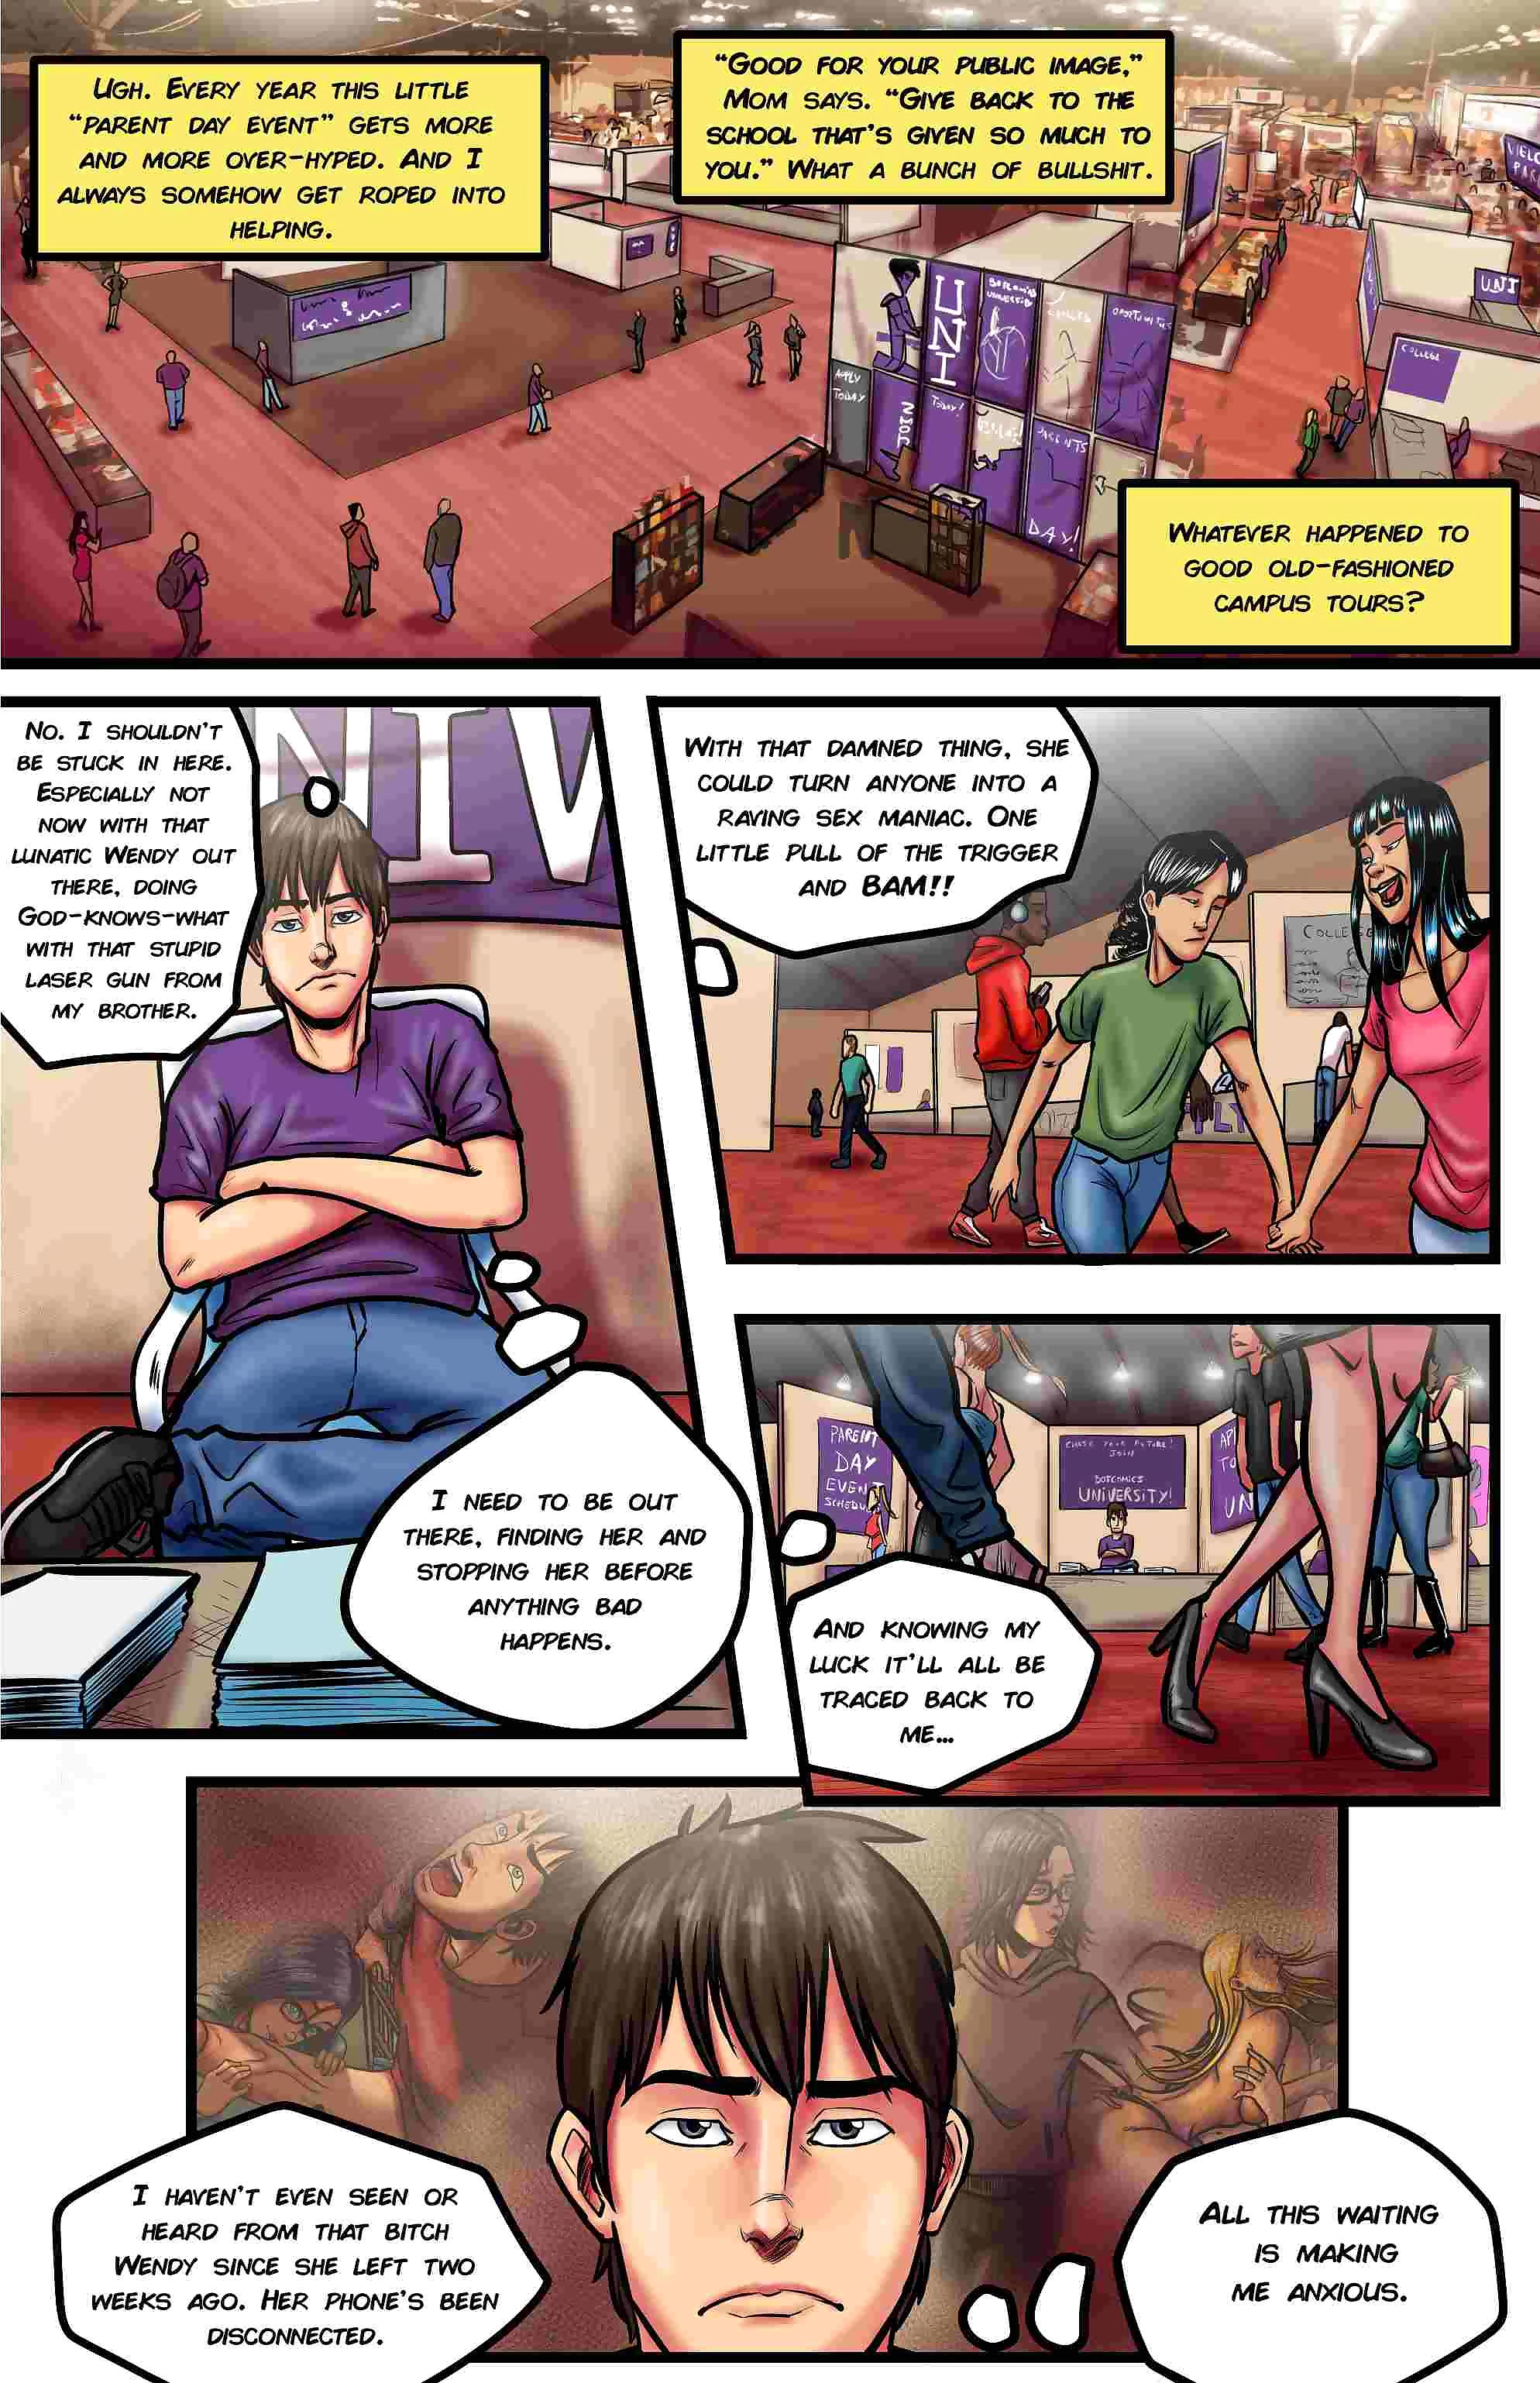 Bot- Seduction Technology Issue 3 page 1